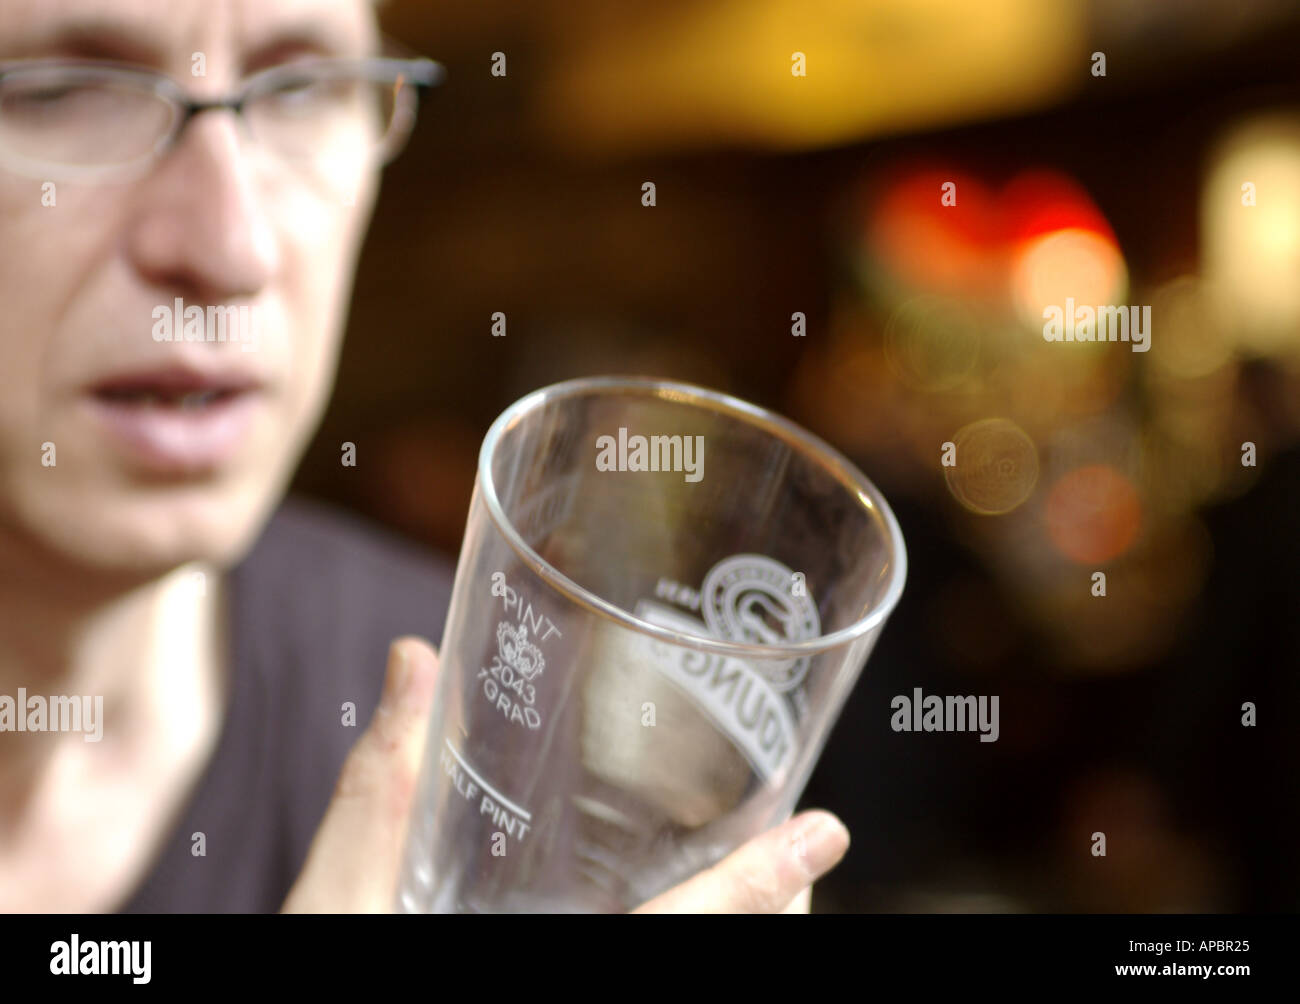 Man looking baffled at empty Youngs beer glass Stock Photo